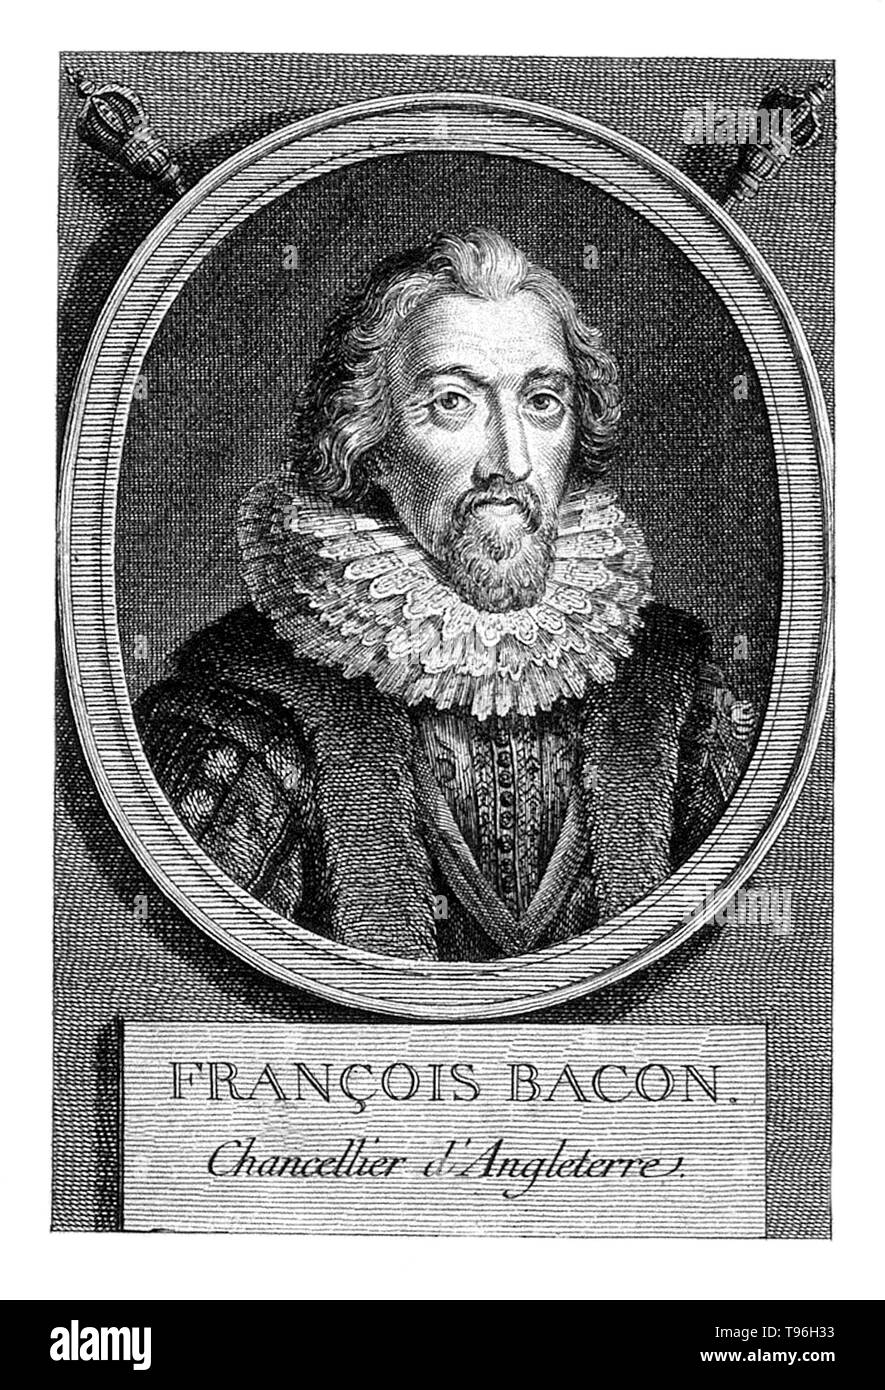 Francois Bacon, Viscount St Alban. Francis Bacon (January 22, 1561 - April 9, 1626) was an English philosopher, statesman, scientist, lawyer, jurist, author and pioneer of the scientific method. He served both as Attorney General and Lord Chancellor of England. His political career ended in disgrace in 1621. After he fell into debt, a Parliamentary Committee on the administration of the law charged him with twenty-three separate counts of corruption. Stock Photo